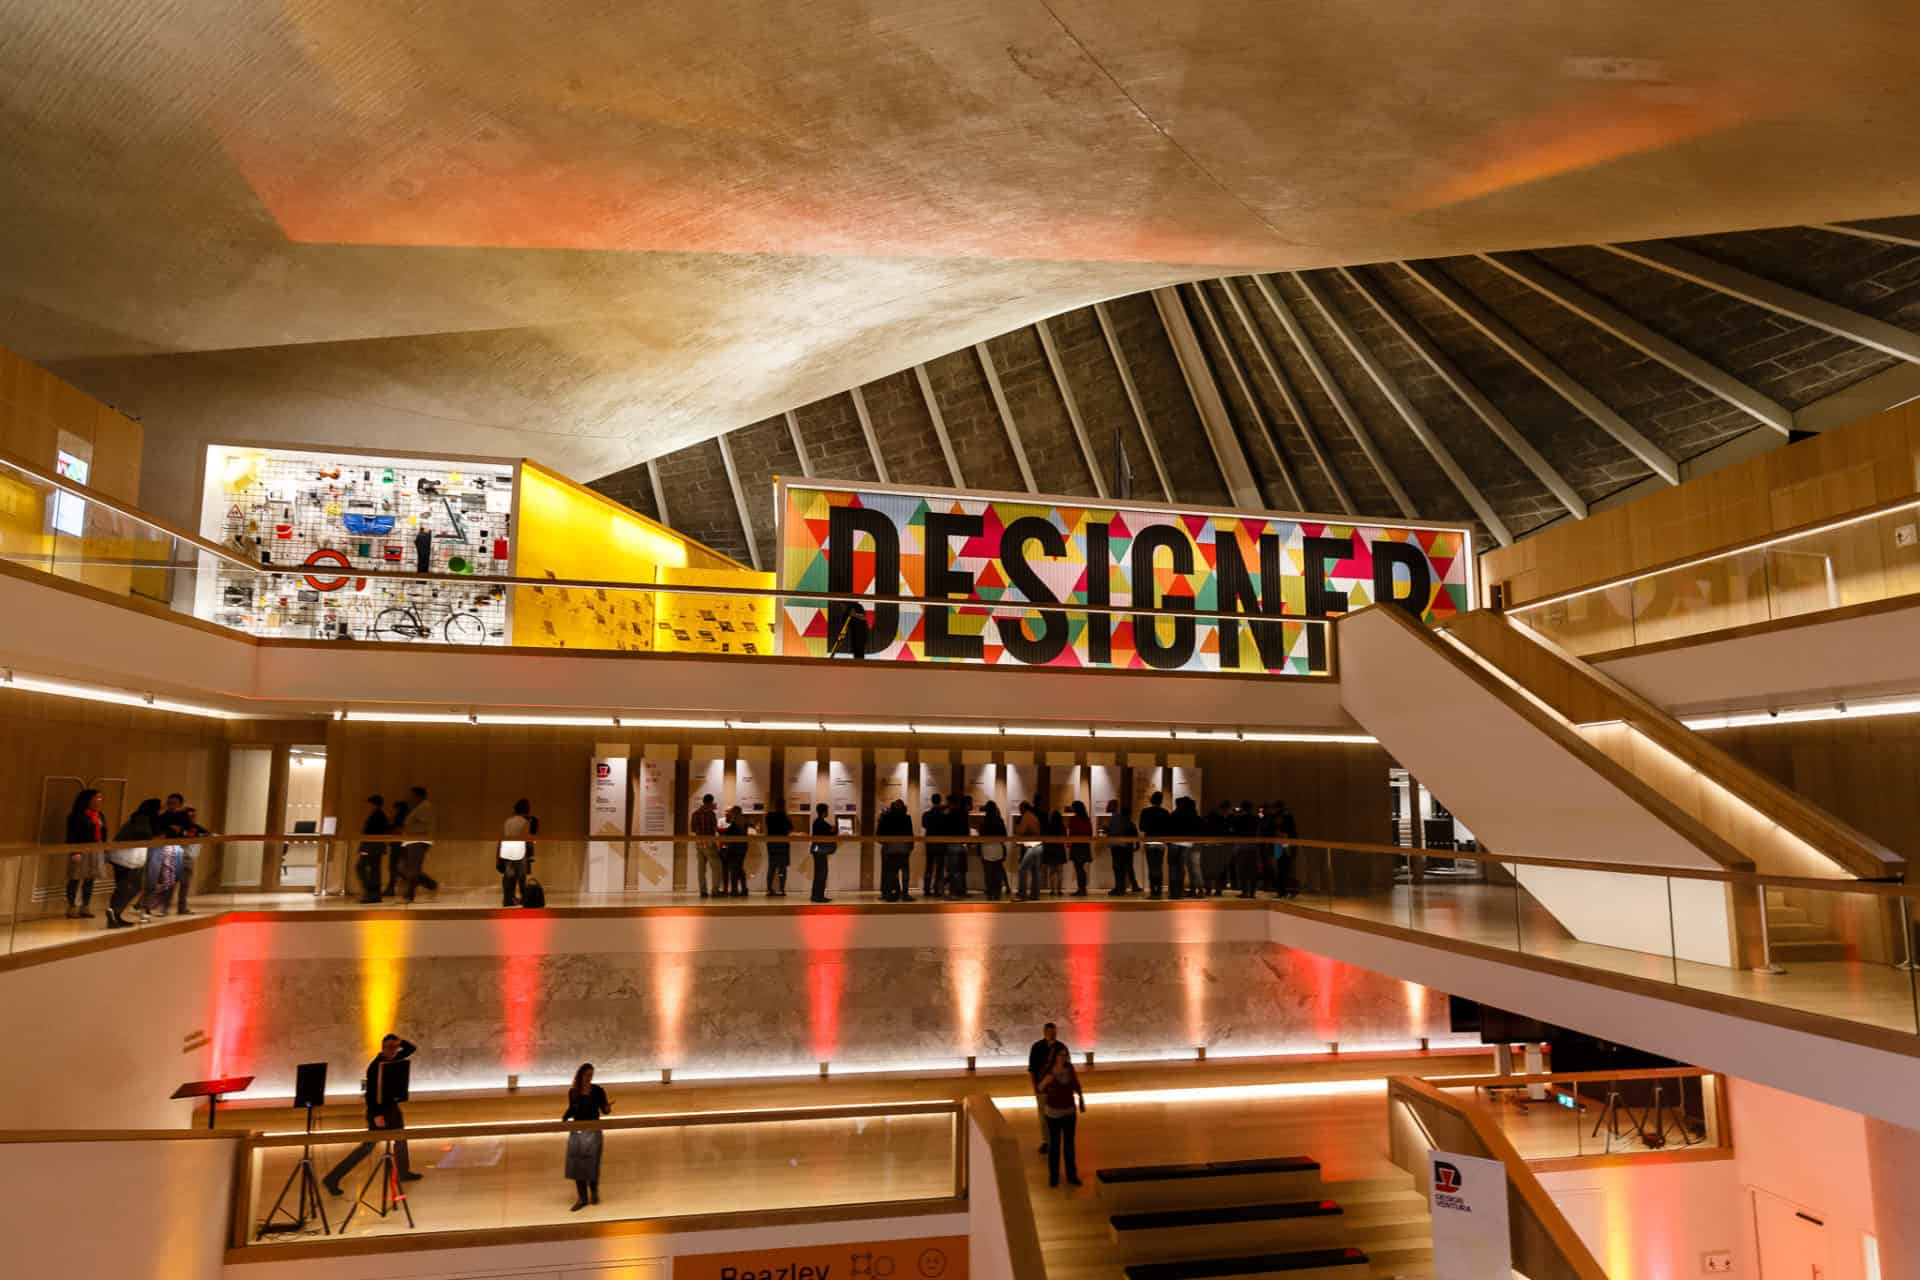 Design Museum, one of the bests Museums in London